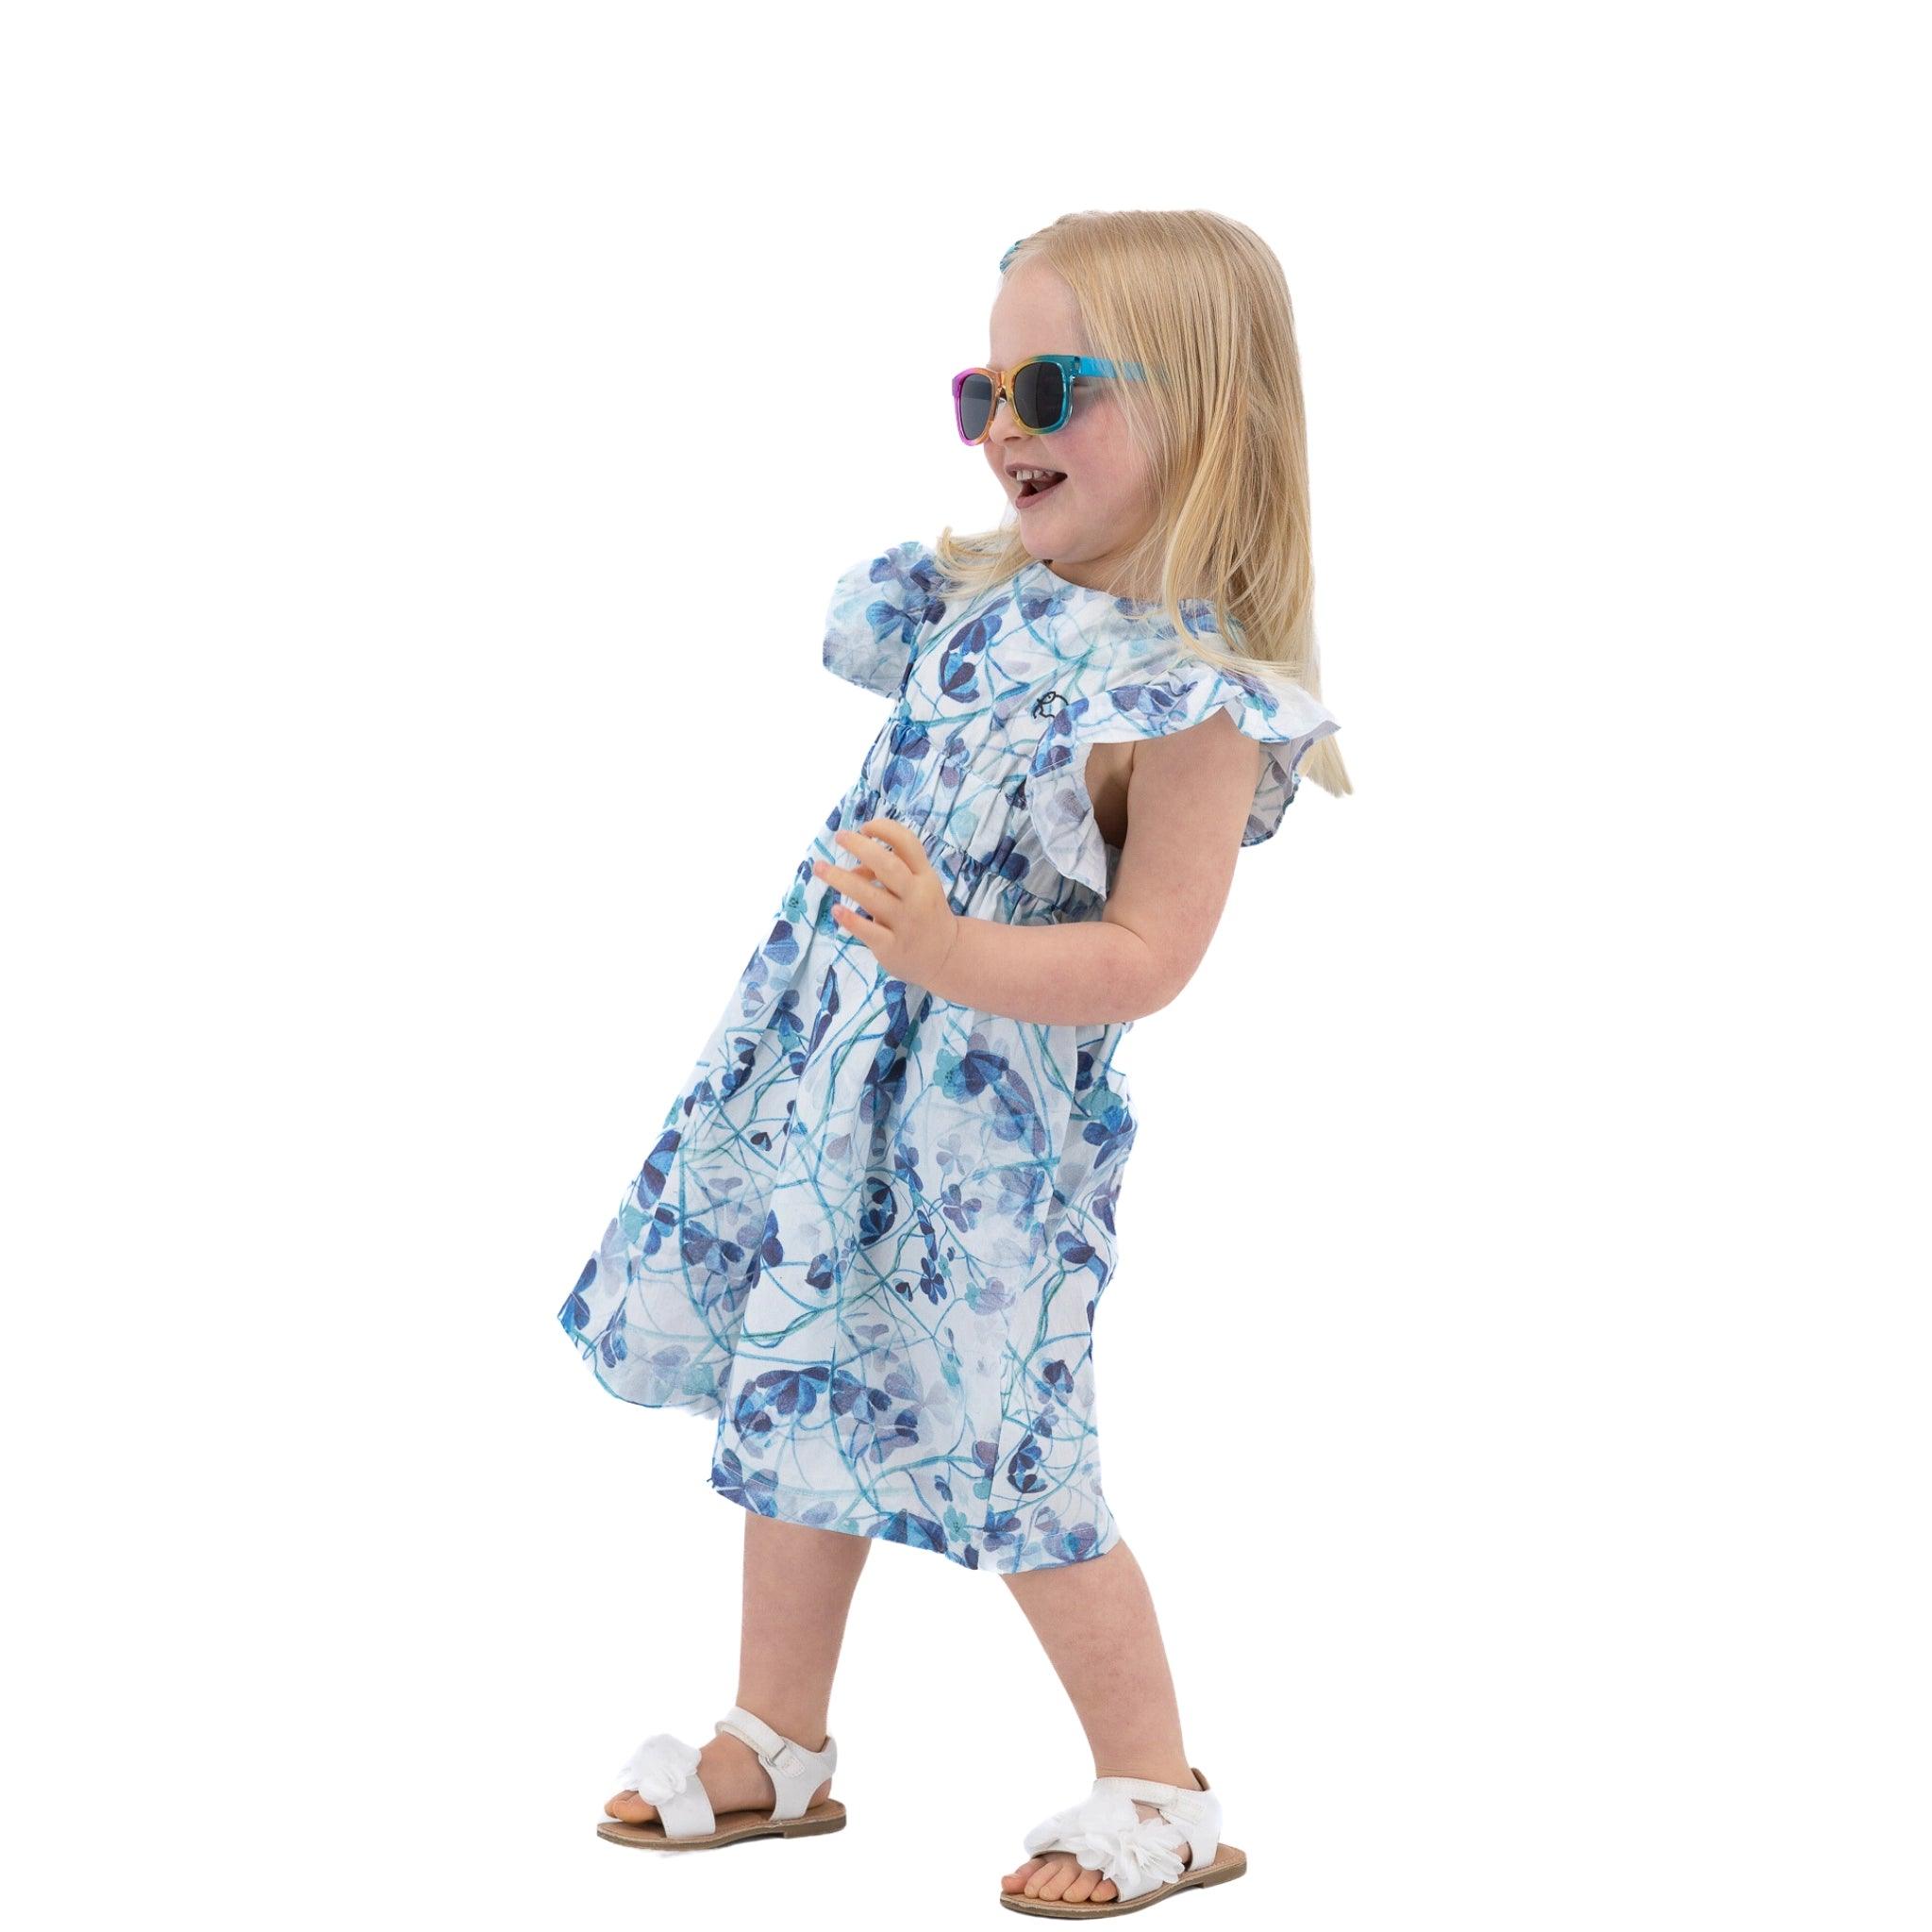 Young girl in a Karee blue cotton floral dress and sunglasses walking happily, isolated on white background.